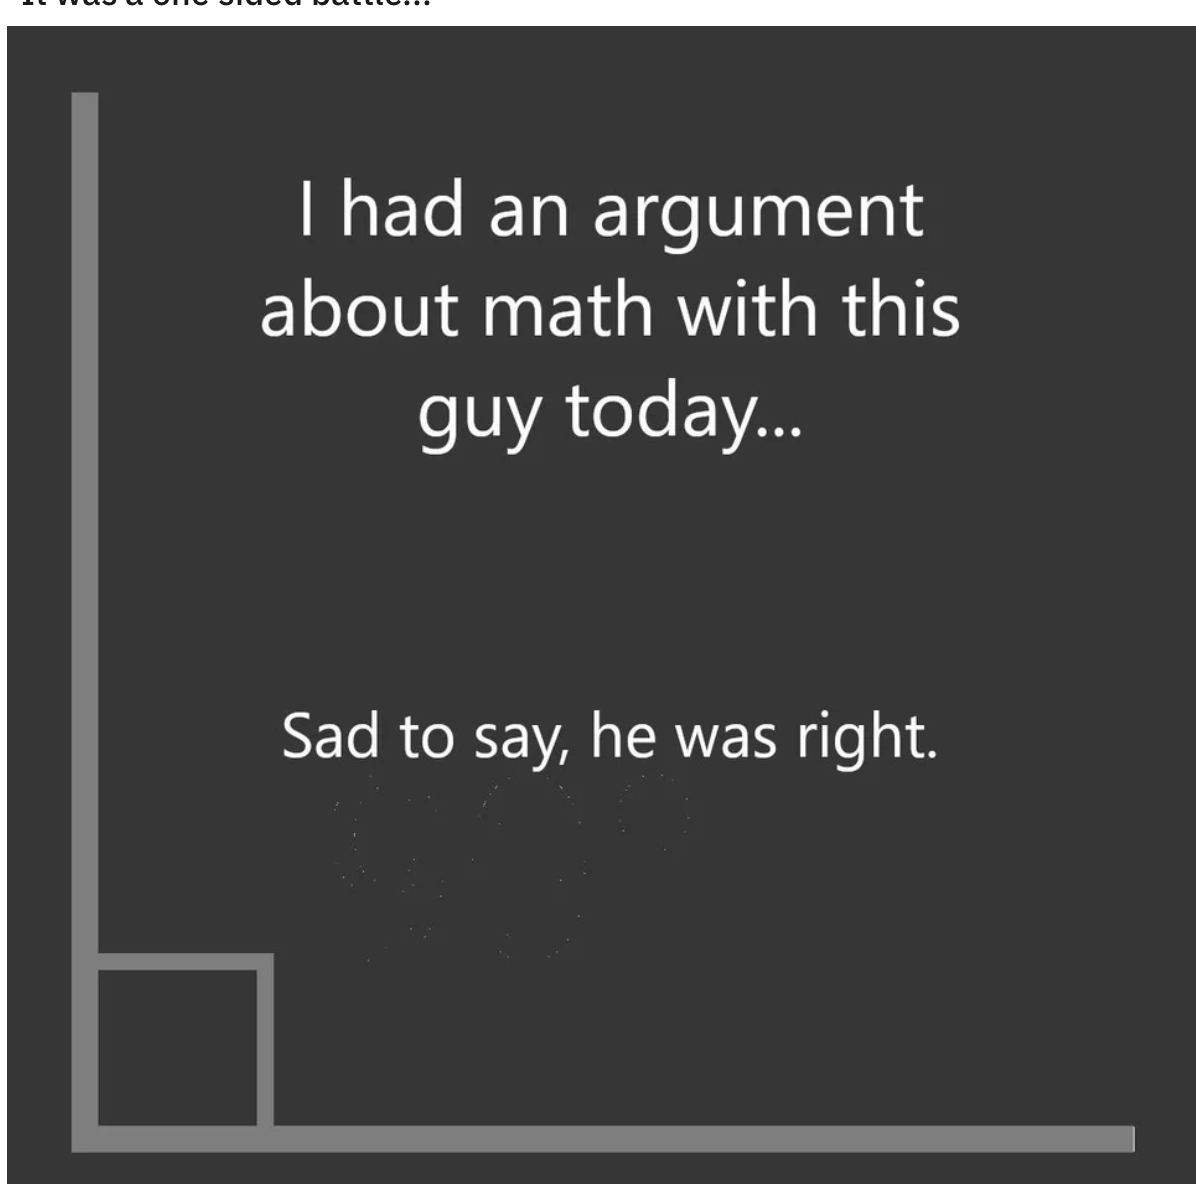 a right angle with the text &quot;I had an argument about math with this guy today... Sad to say, he was right.&quot;